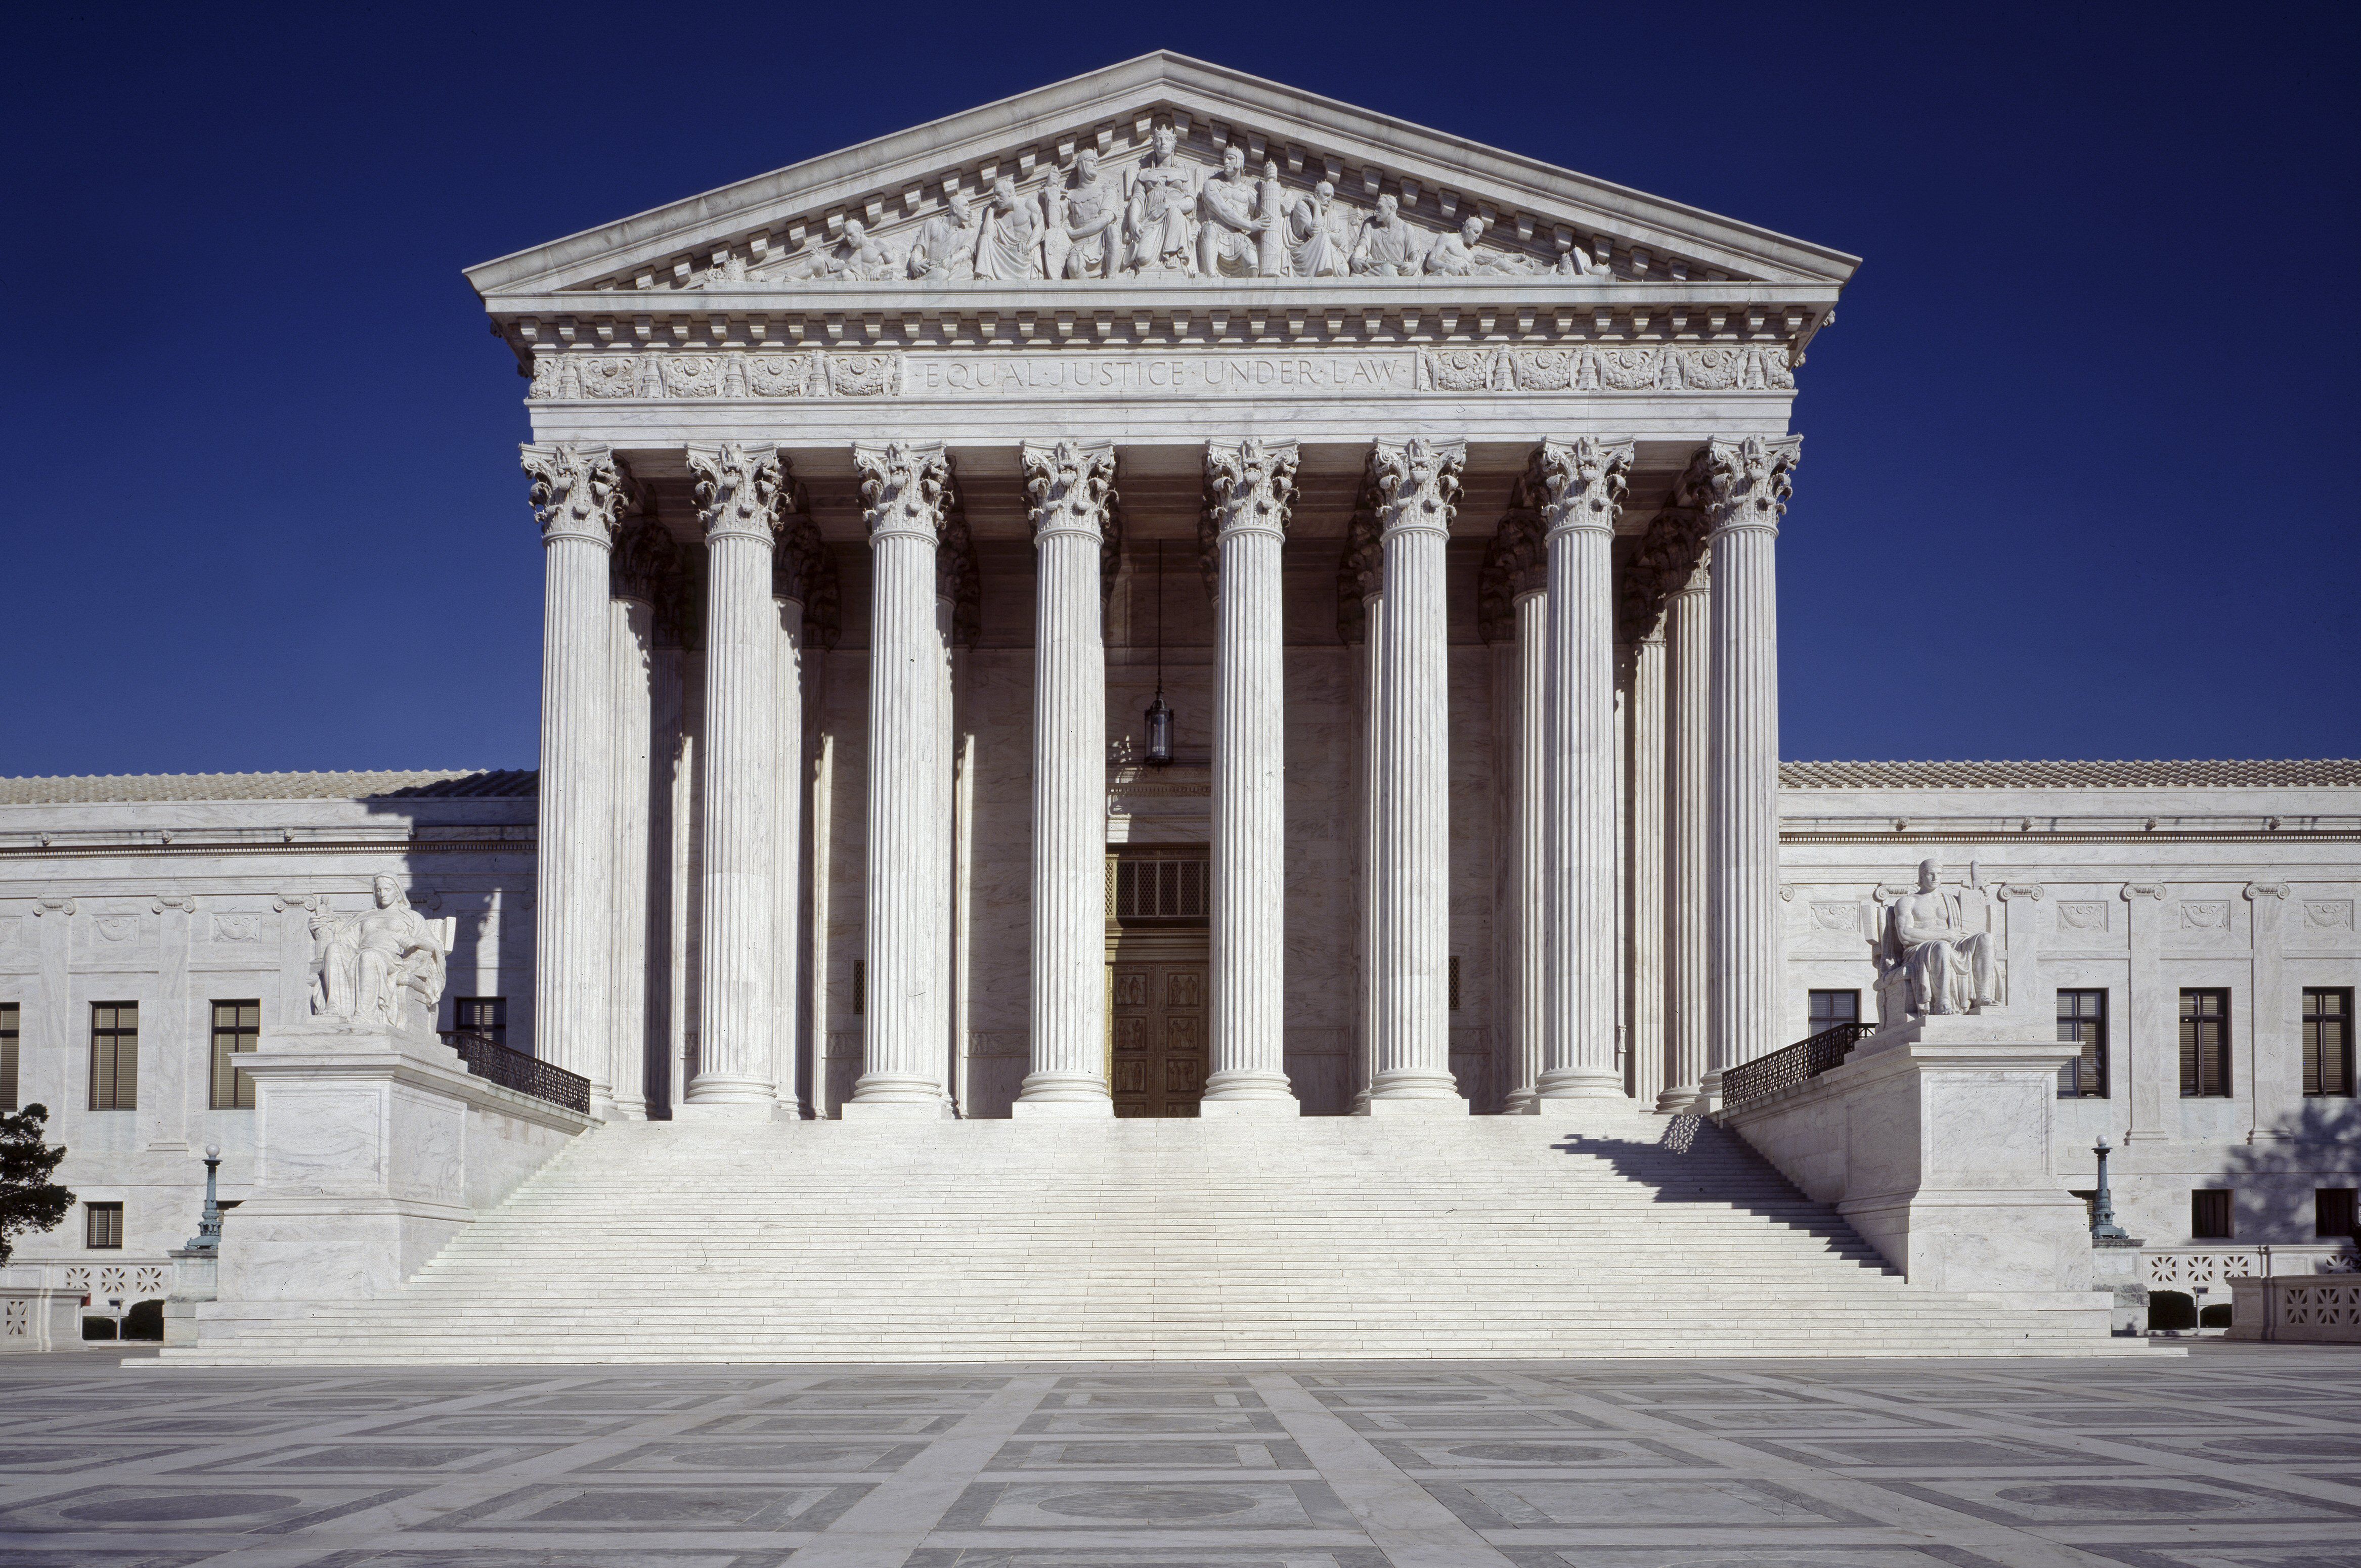 U.S. Supreme Court Decision May Impact Climate Policies, Narrows EPA Greenhouse Gas Regulations